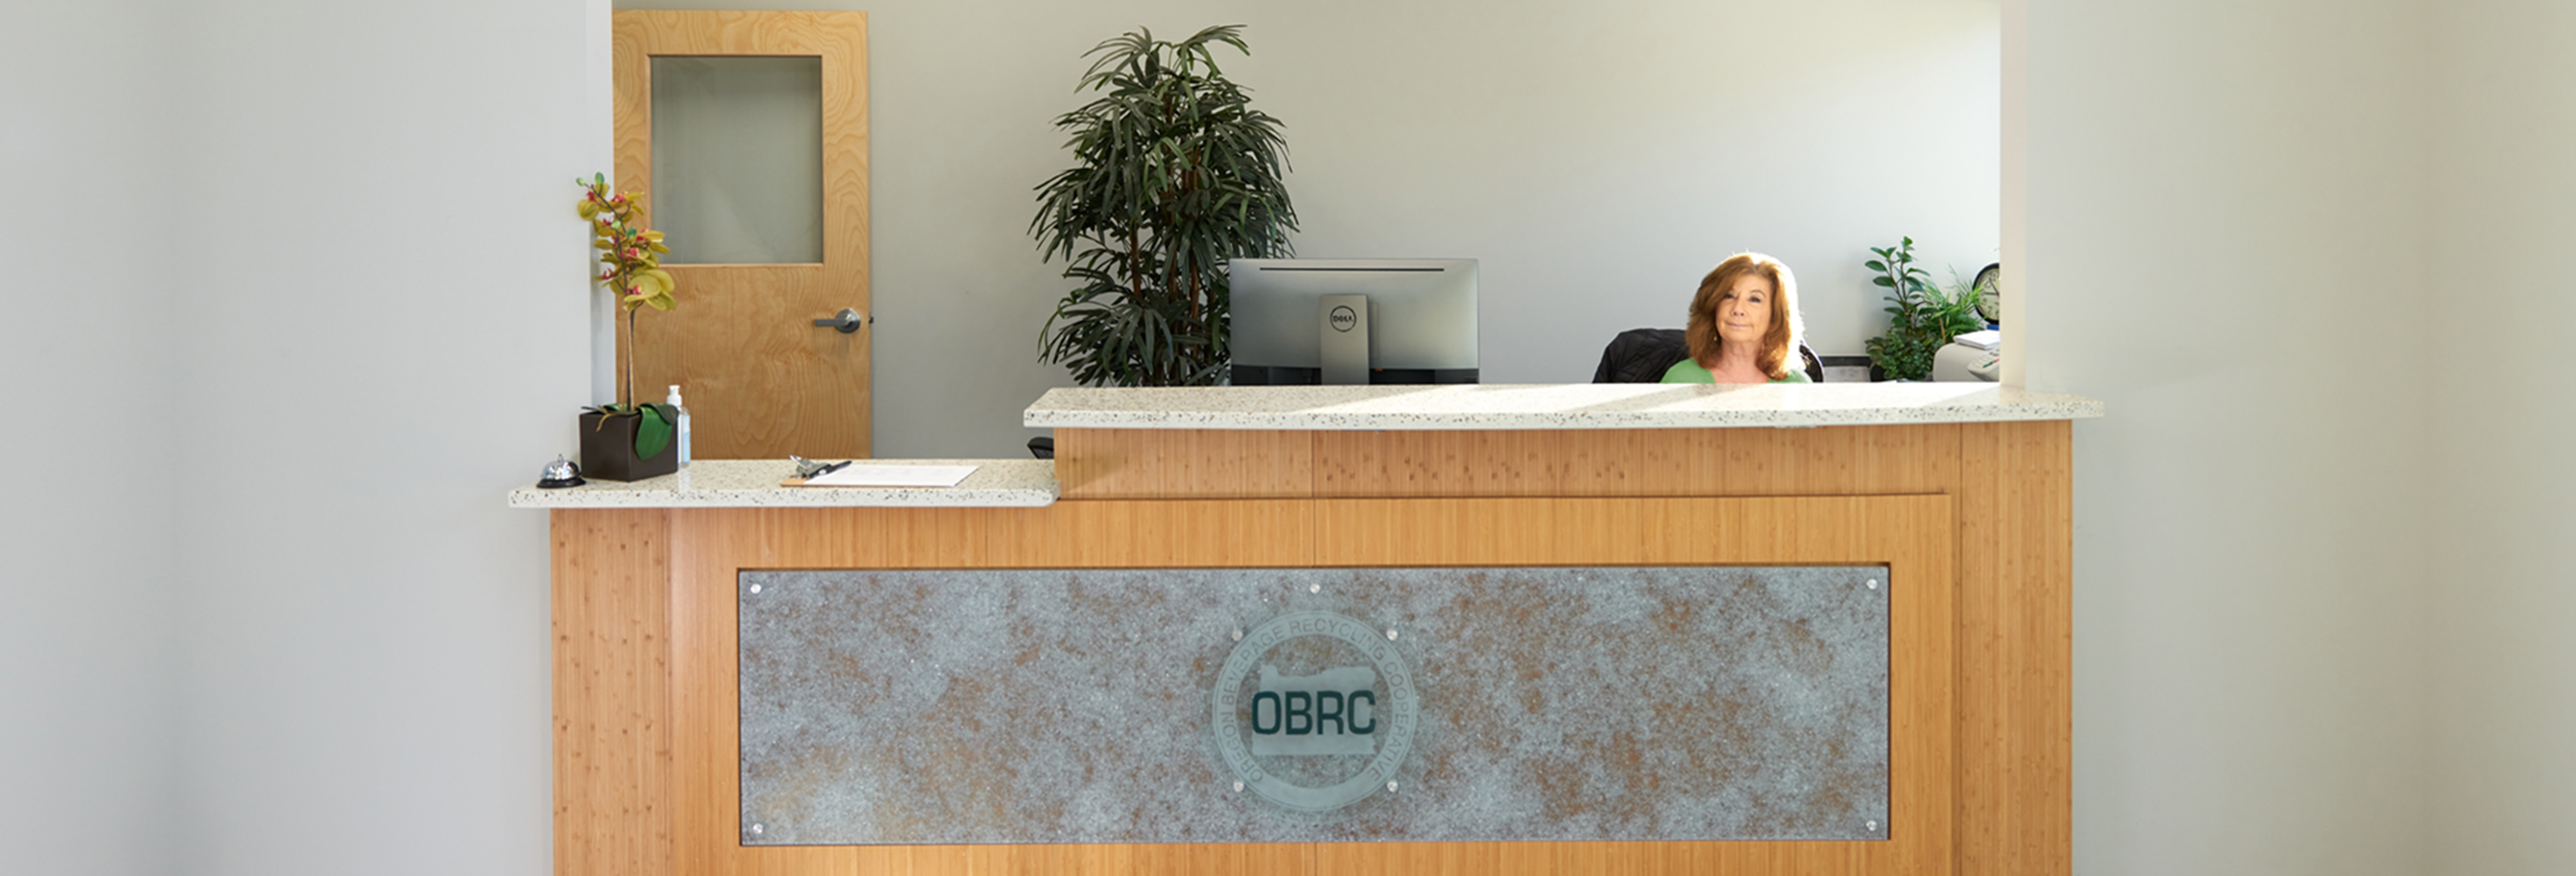 A receptionist sitting behind the front desk at the OBRC headquarters.